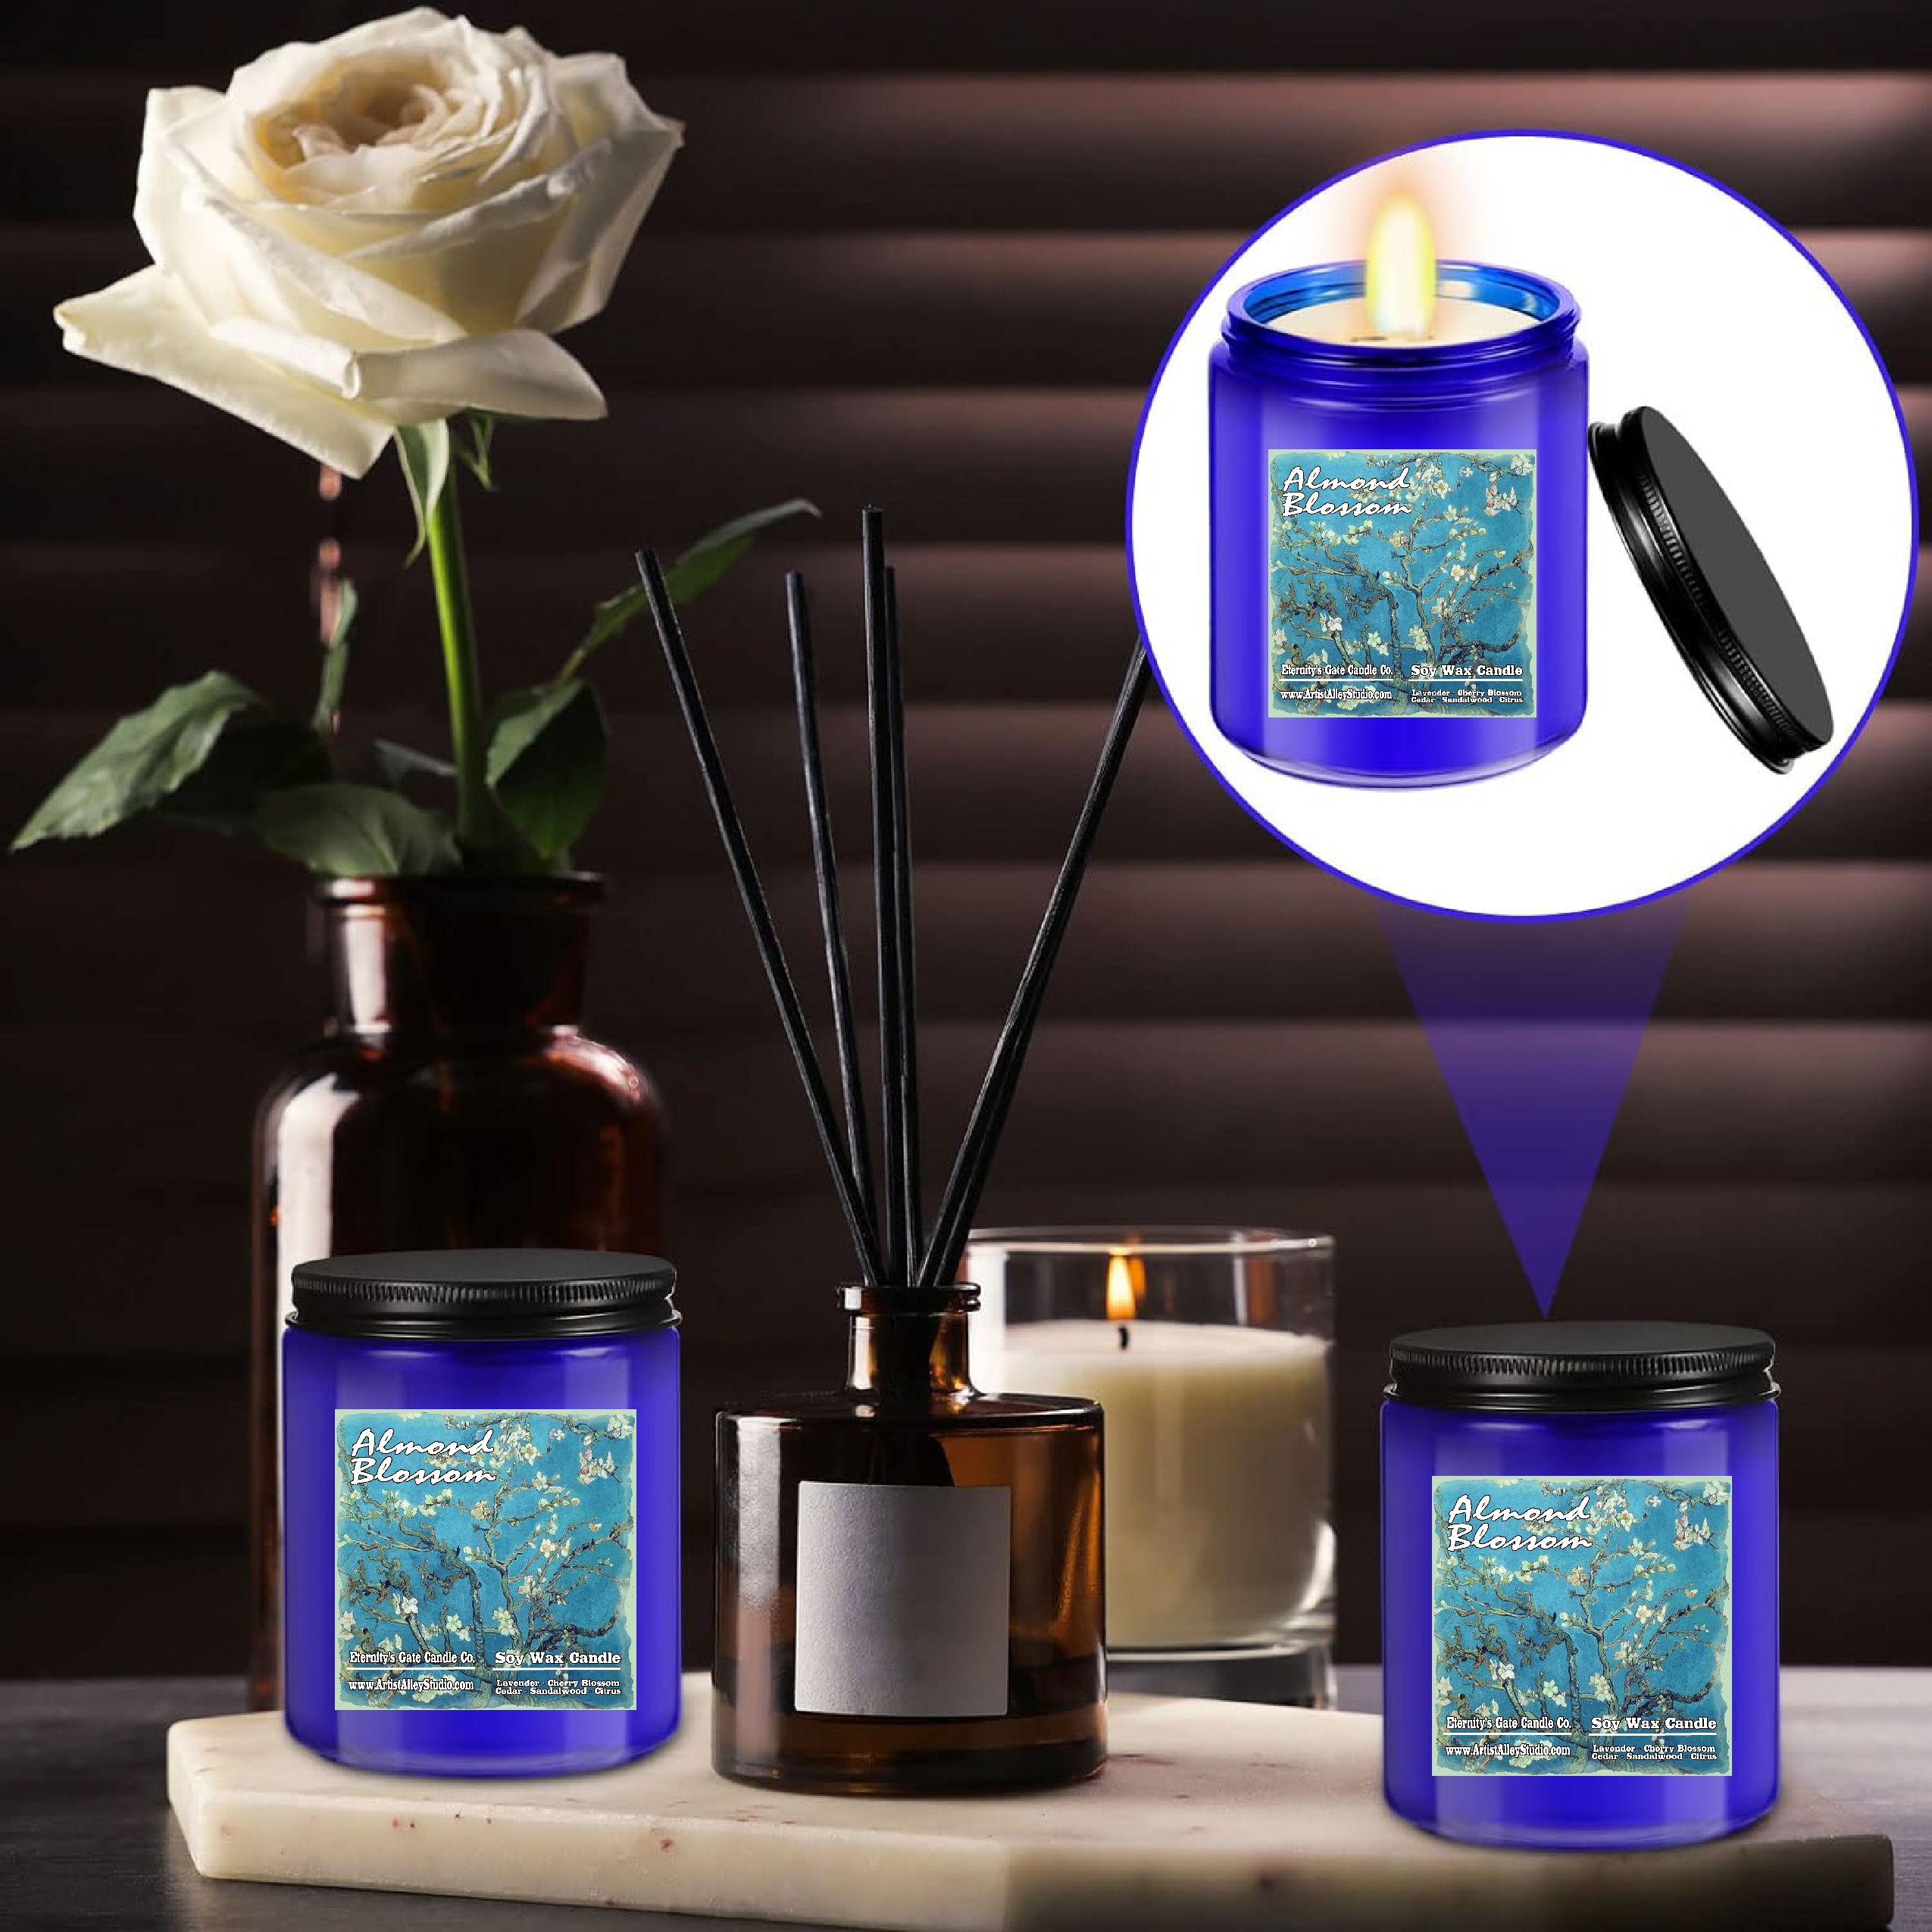 Almond Blossom Vincent van Gogh inspired deep scented soy wax candle by Eternity's Gate Candle Company Promo Photo 1